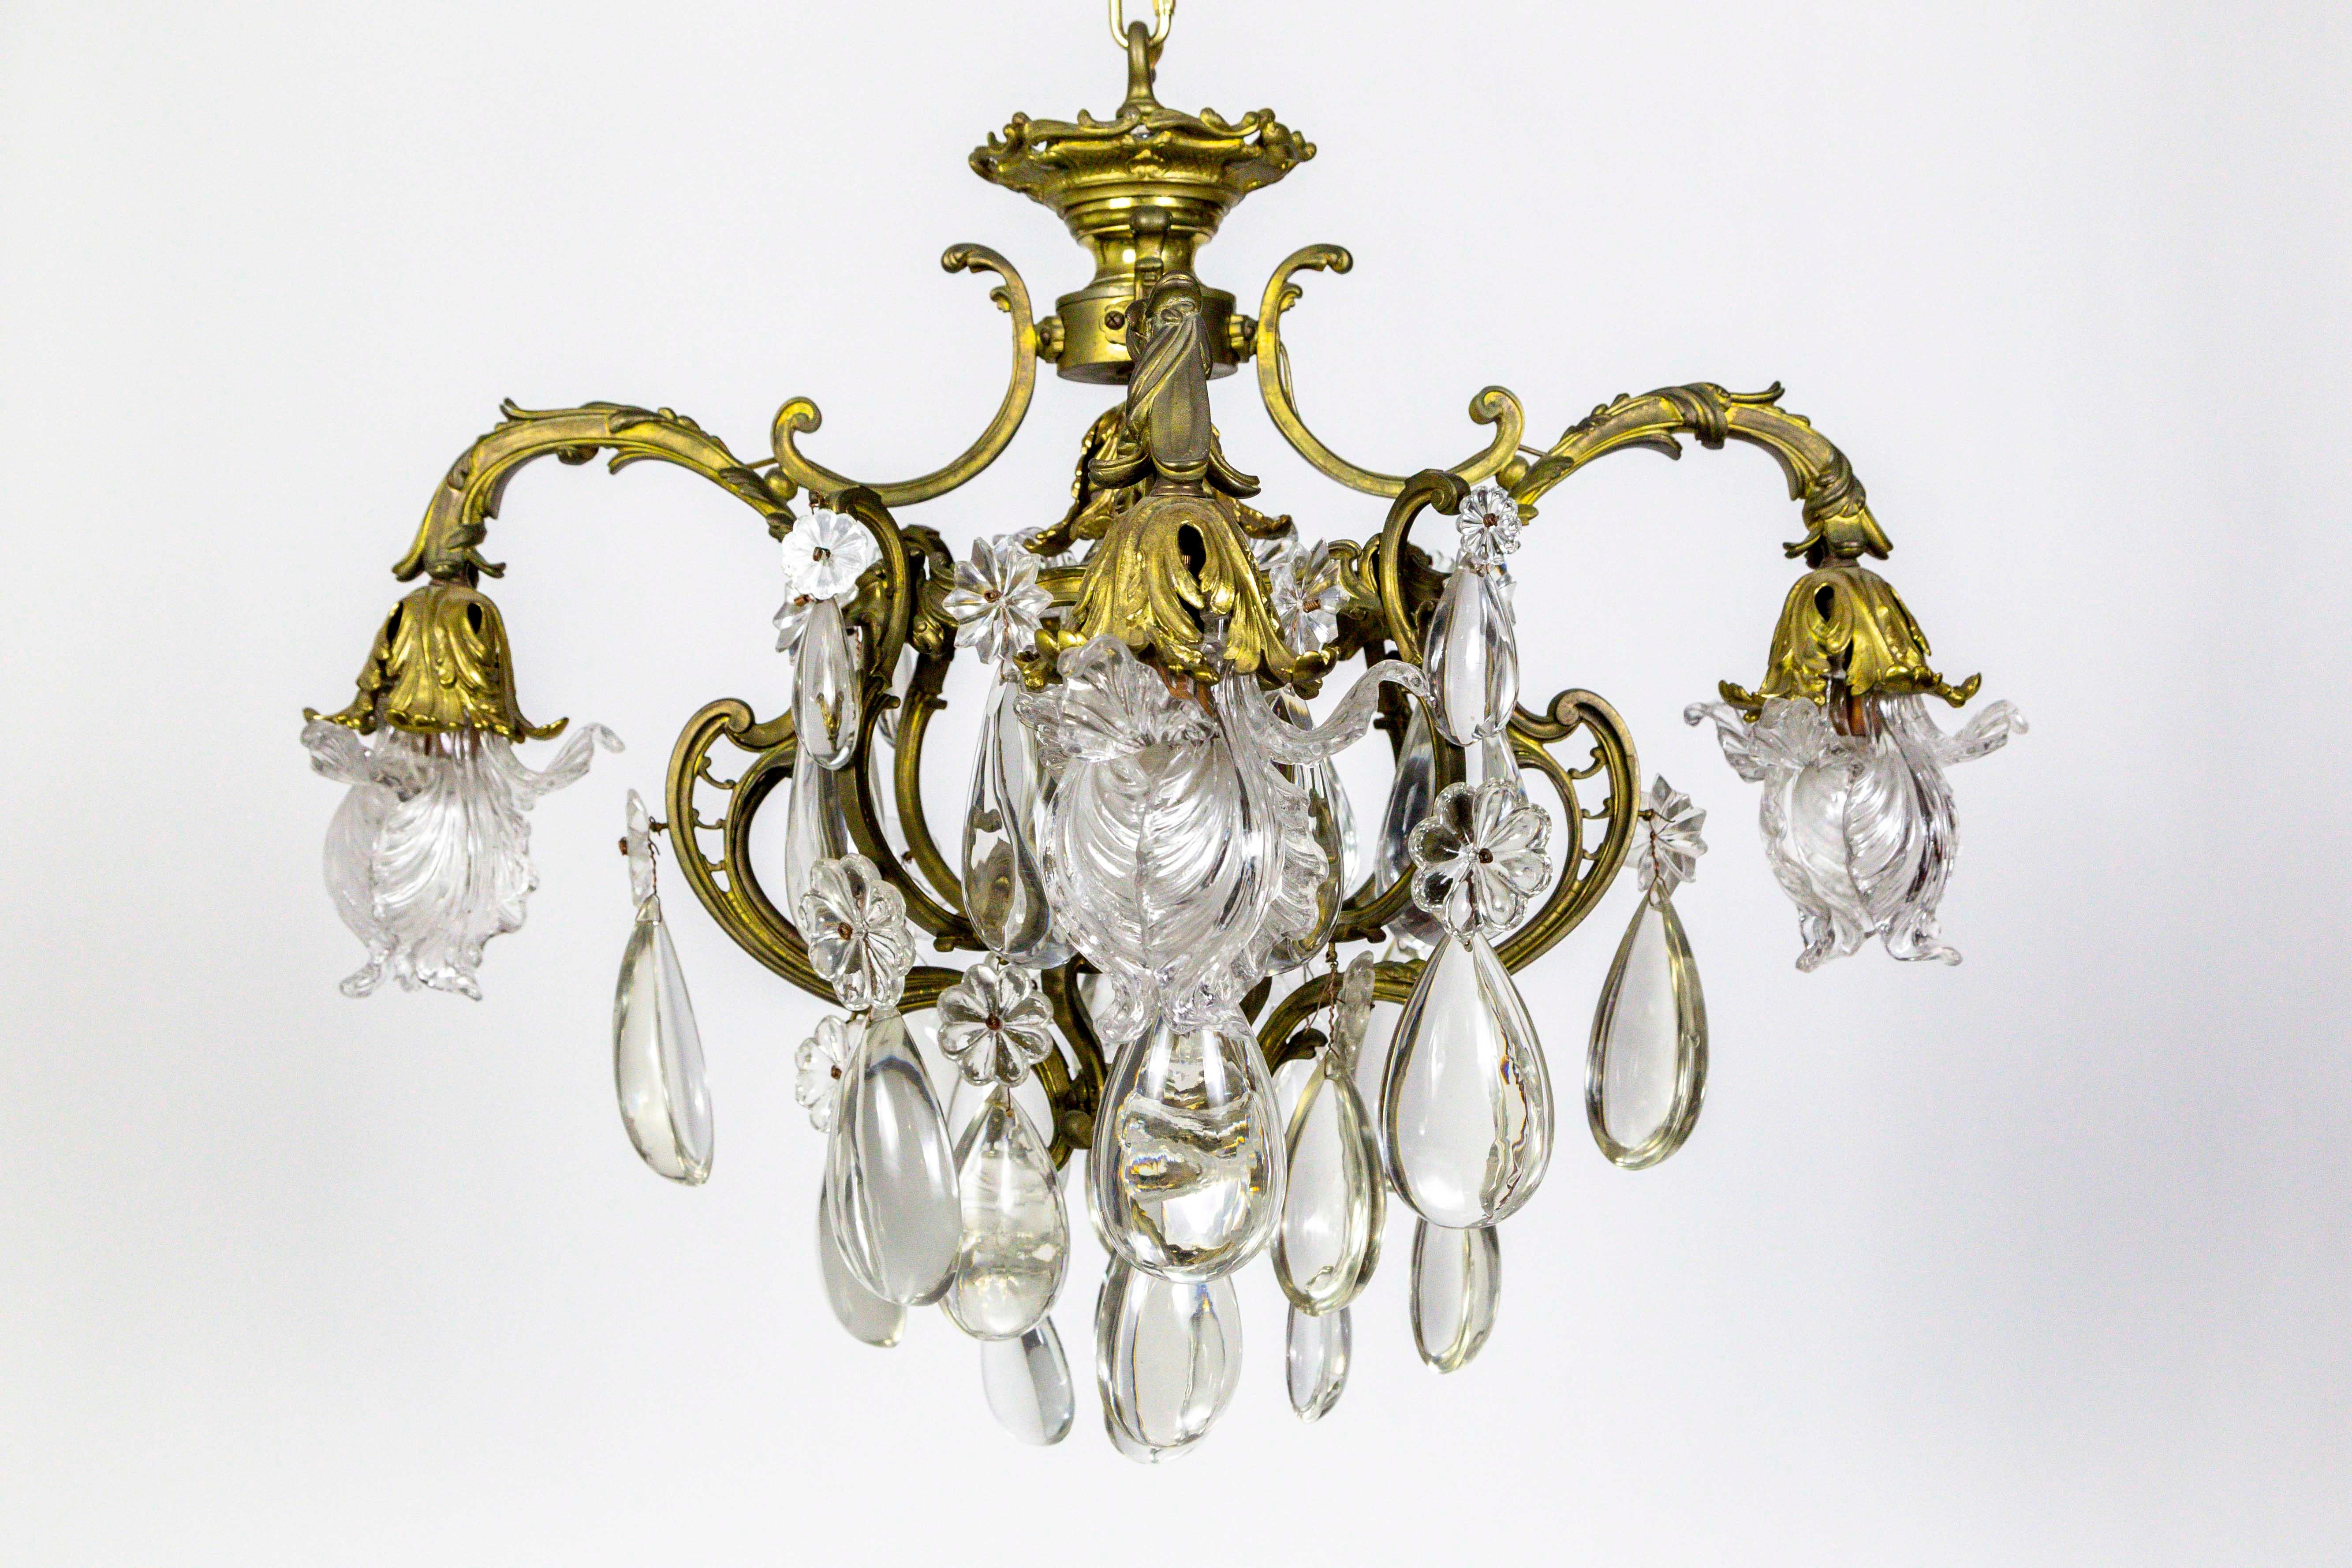 A mesmerizing, French, Belle Époque, 5-light, heavy bronze chandelier with major smooth, half-back, almond, crystals and gorgeous, Art Nouveau influenced, swooping, leaf and vine structure; also detailed with rosette and star crystals. All the